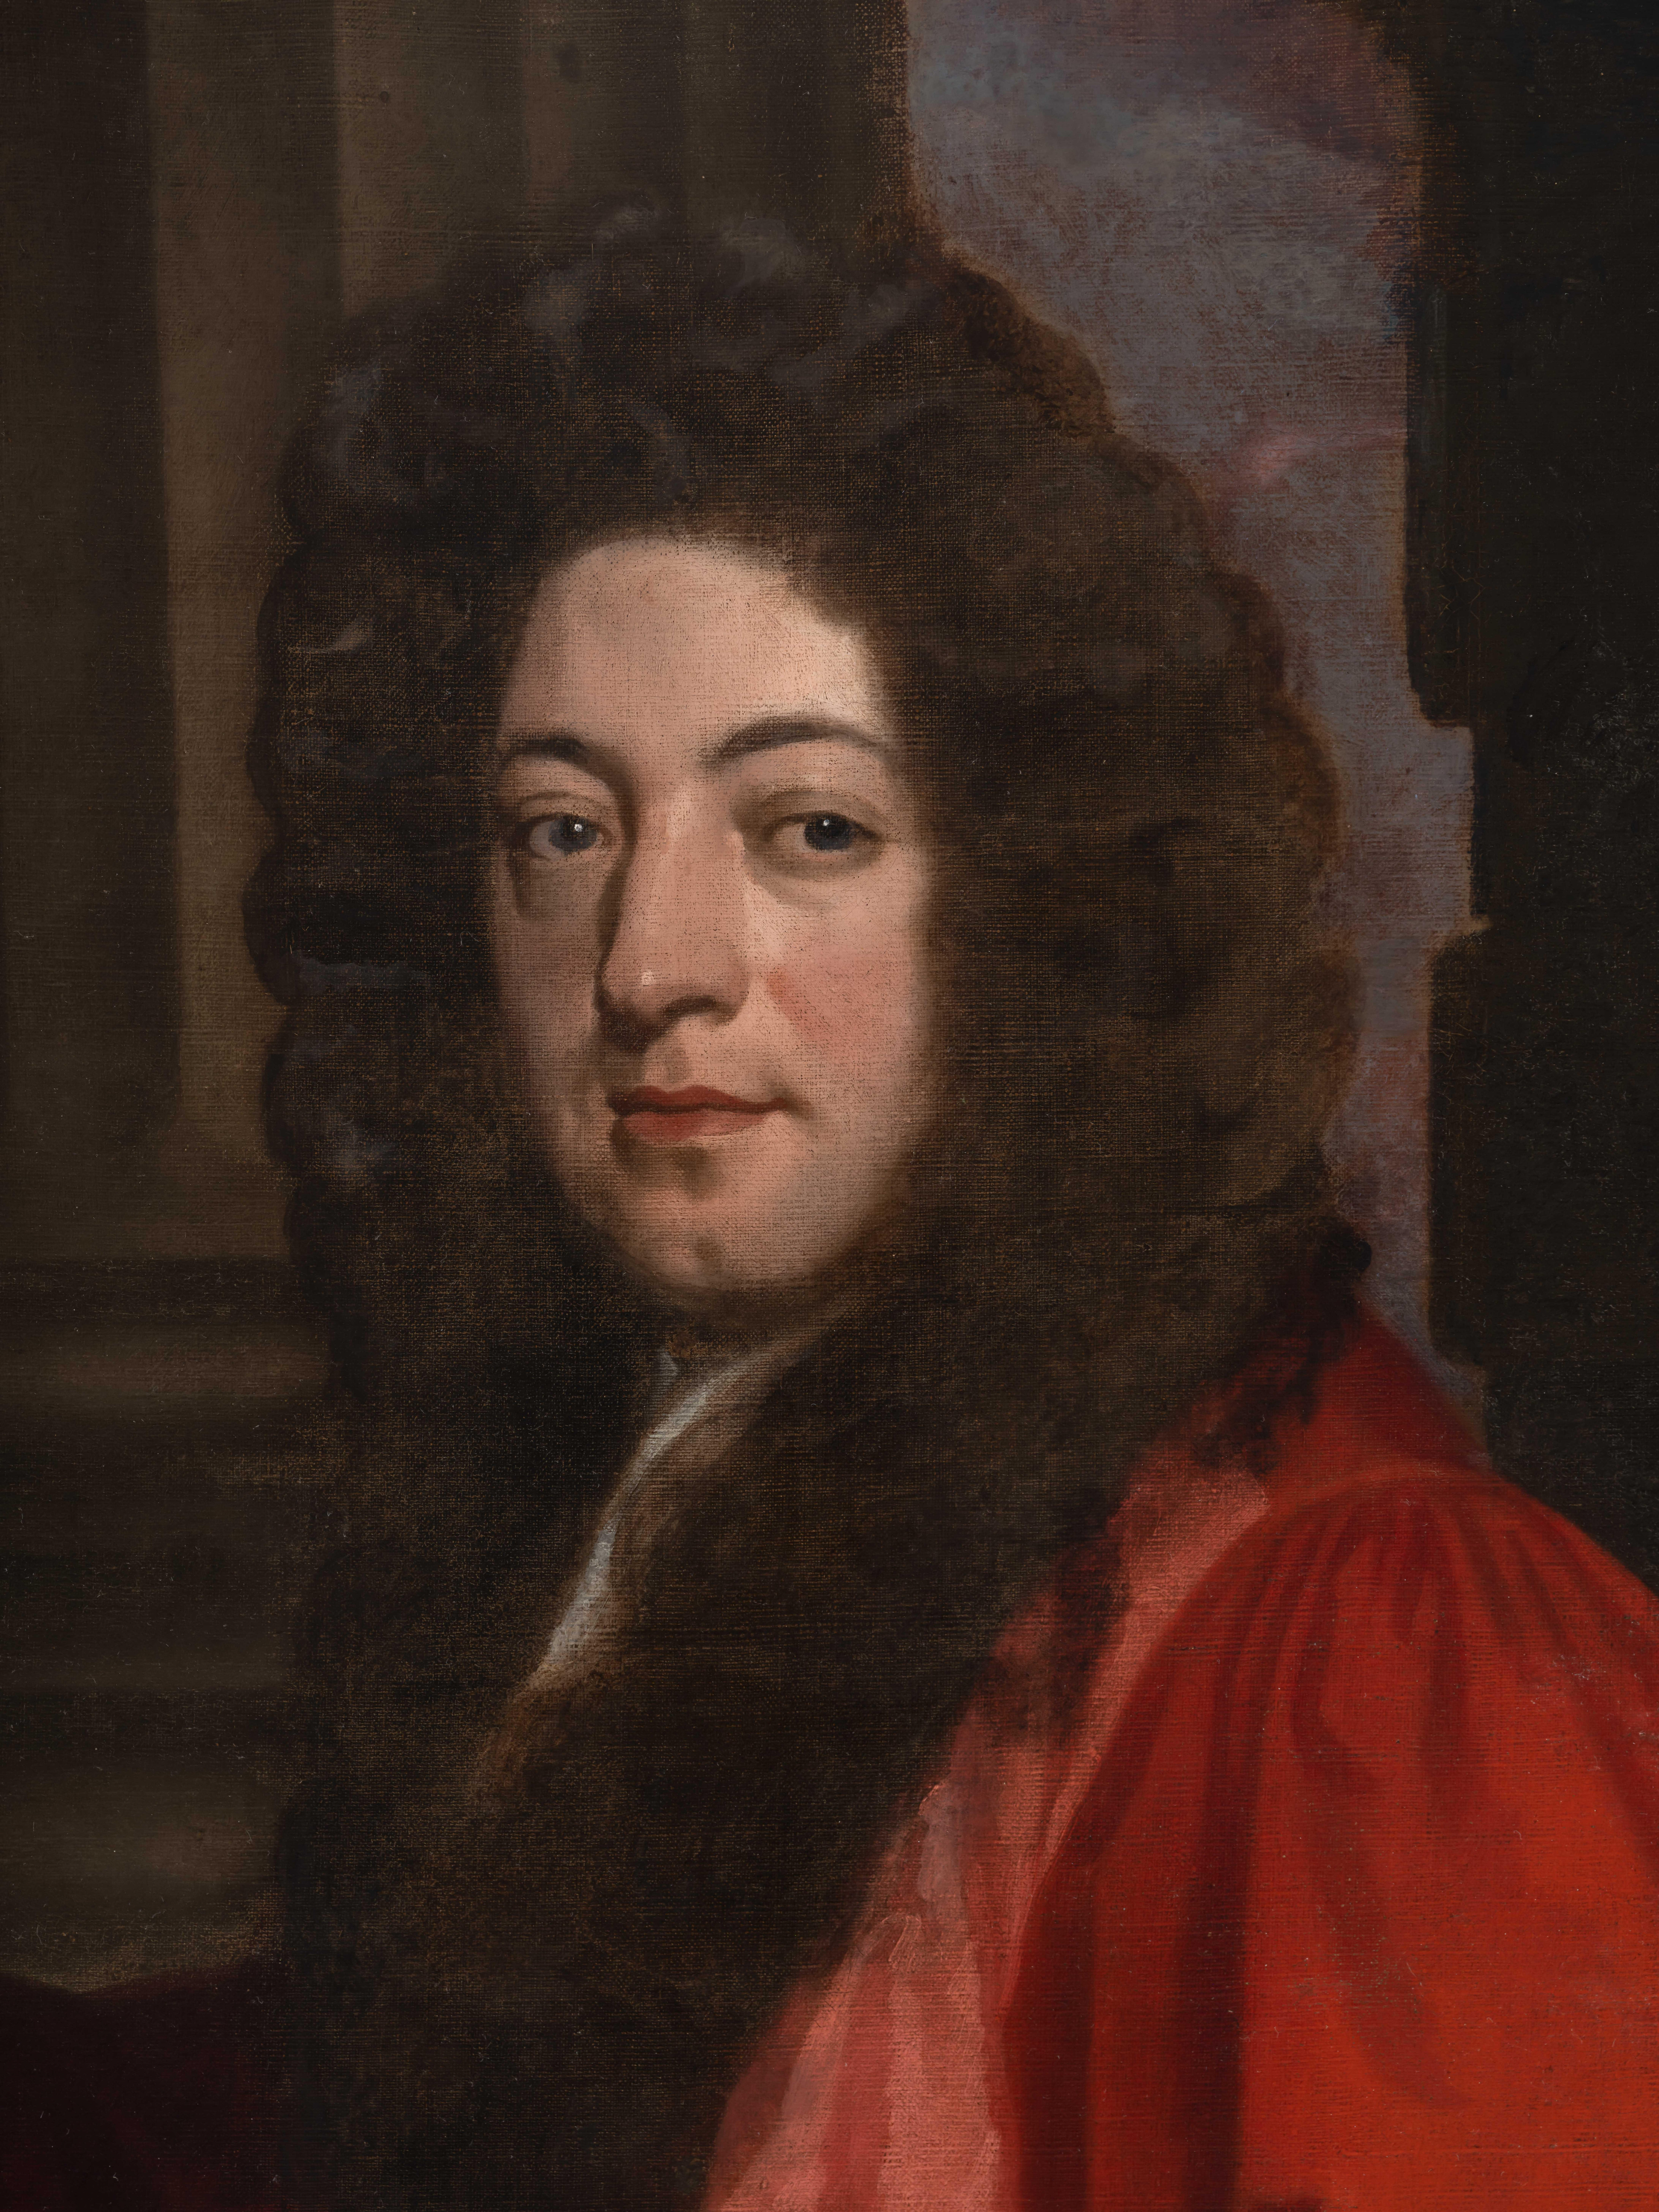 Titan Fine Art present this striking portrait, which was painted by one of the most talented artists working in England during the last half of the 17th century, John Greenhill.  Greenhill was at the centre of the artistic scene in London and his